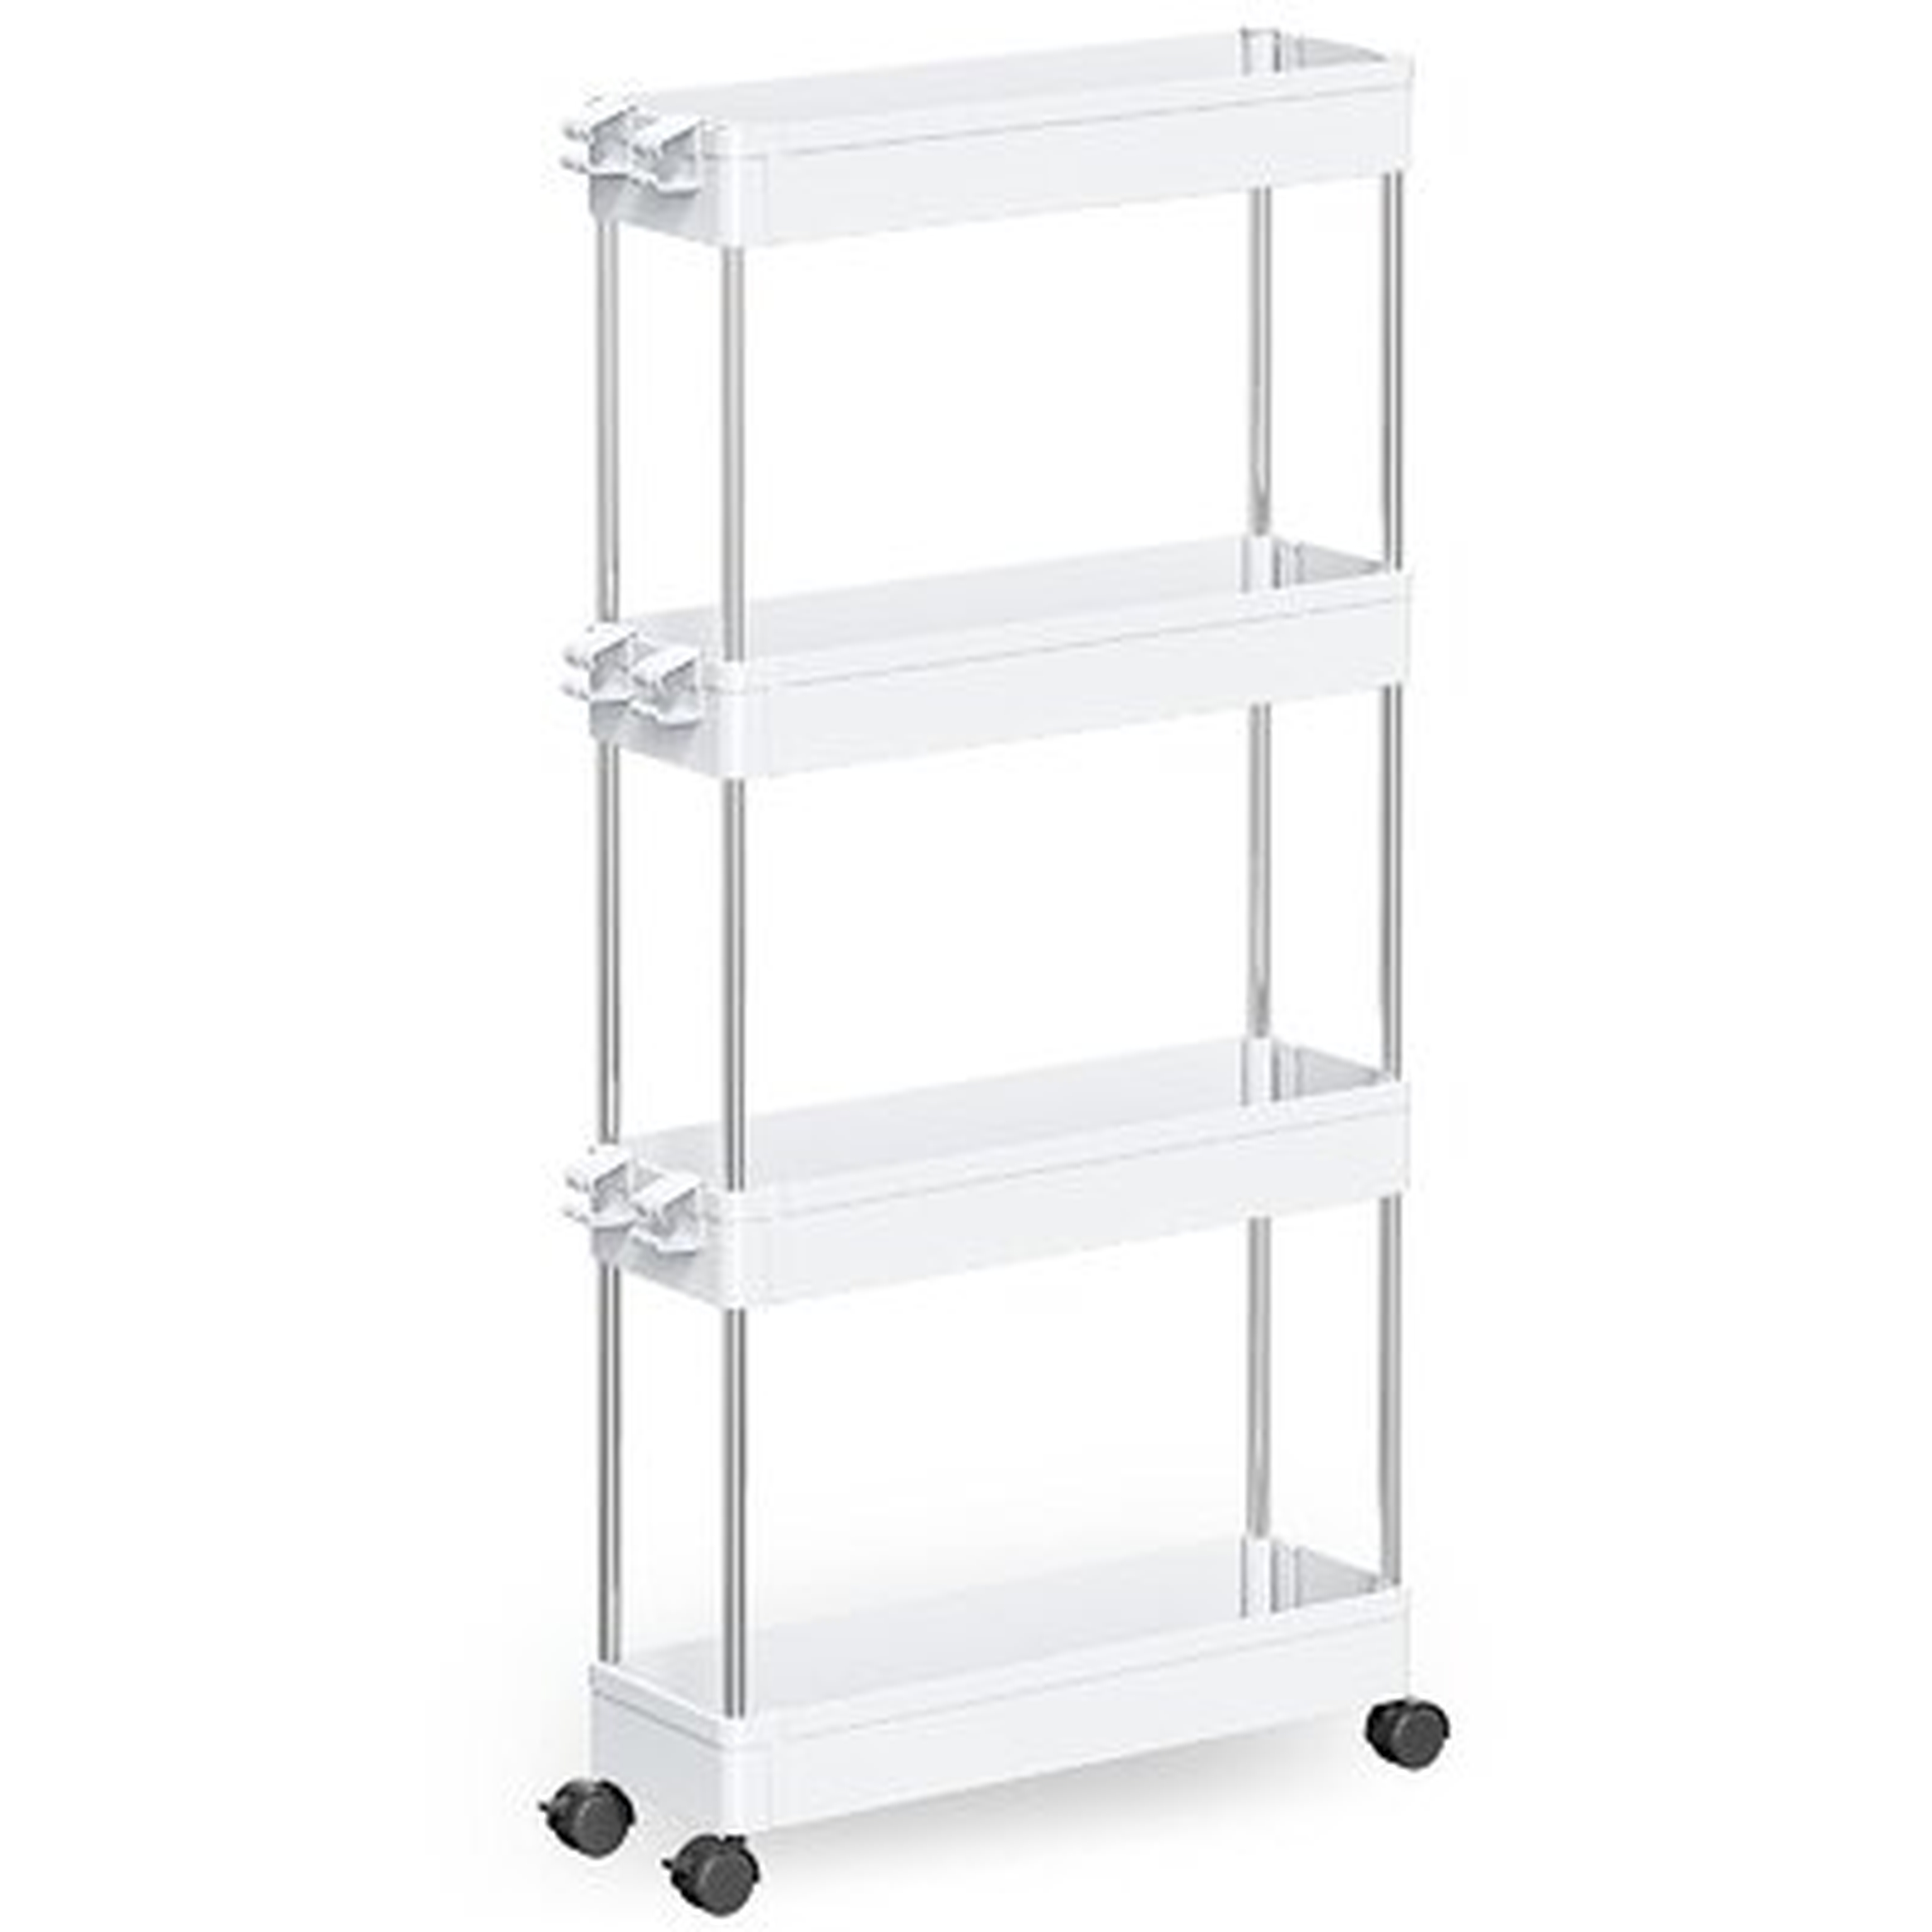 Slim Storage Cart 4 Tier Heavy Duty Rolling Utility Cart Mobile Slide Out Organizer, Shelving Unit With Wheels Bathroom, Kitchen, Laundry & Narrow Places By - Wayfair